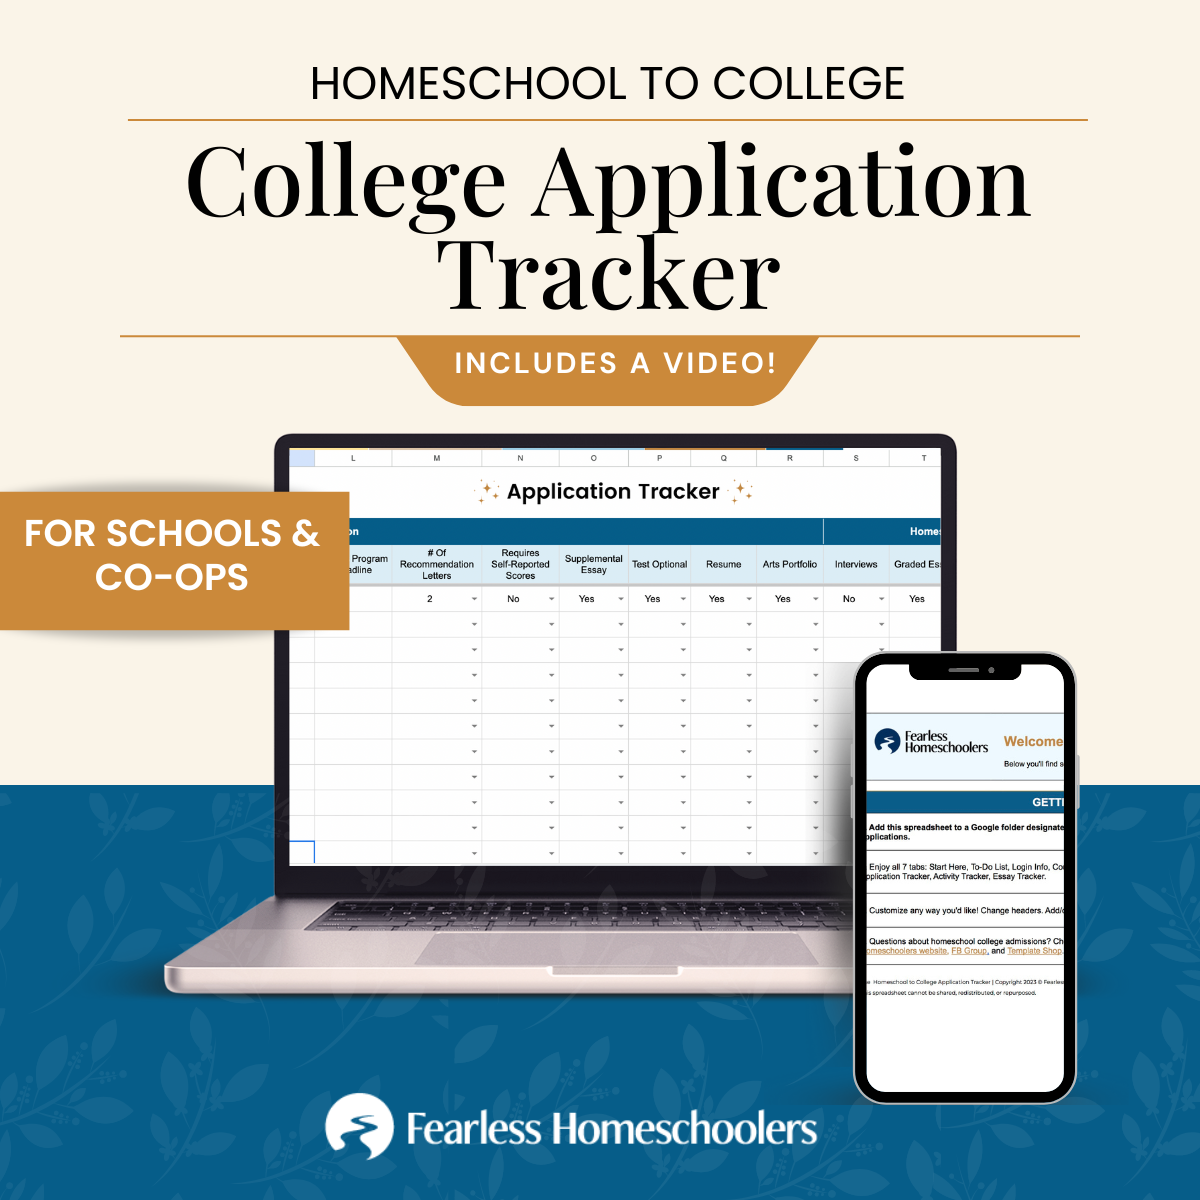 Homeschool College Application Tracker for co-ops